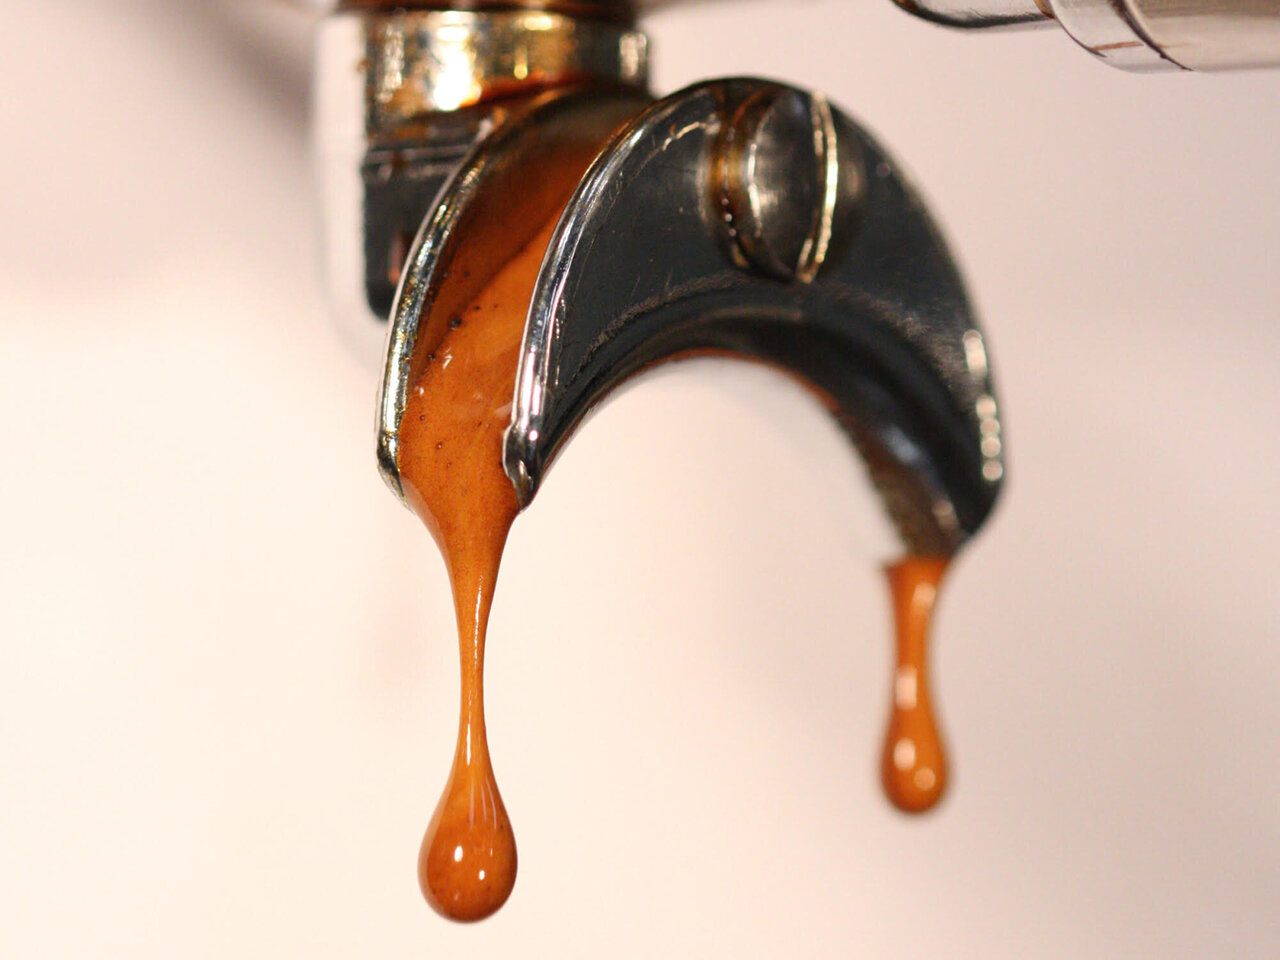 Brewed coffee grounds offer sustainable alternative for clothing dye